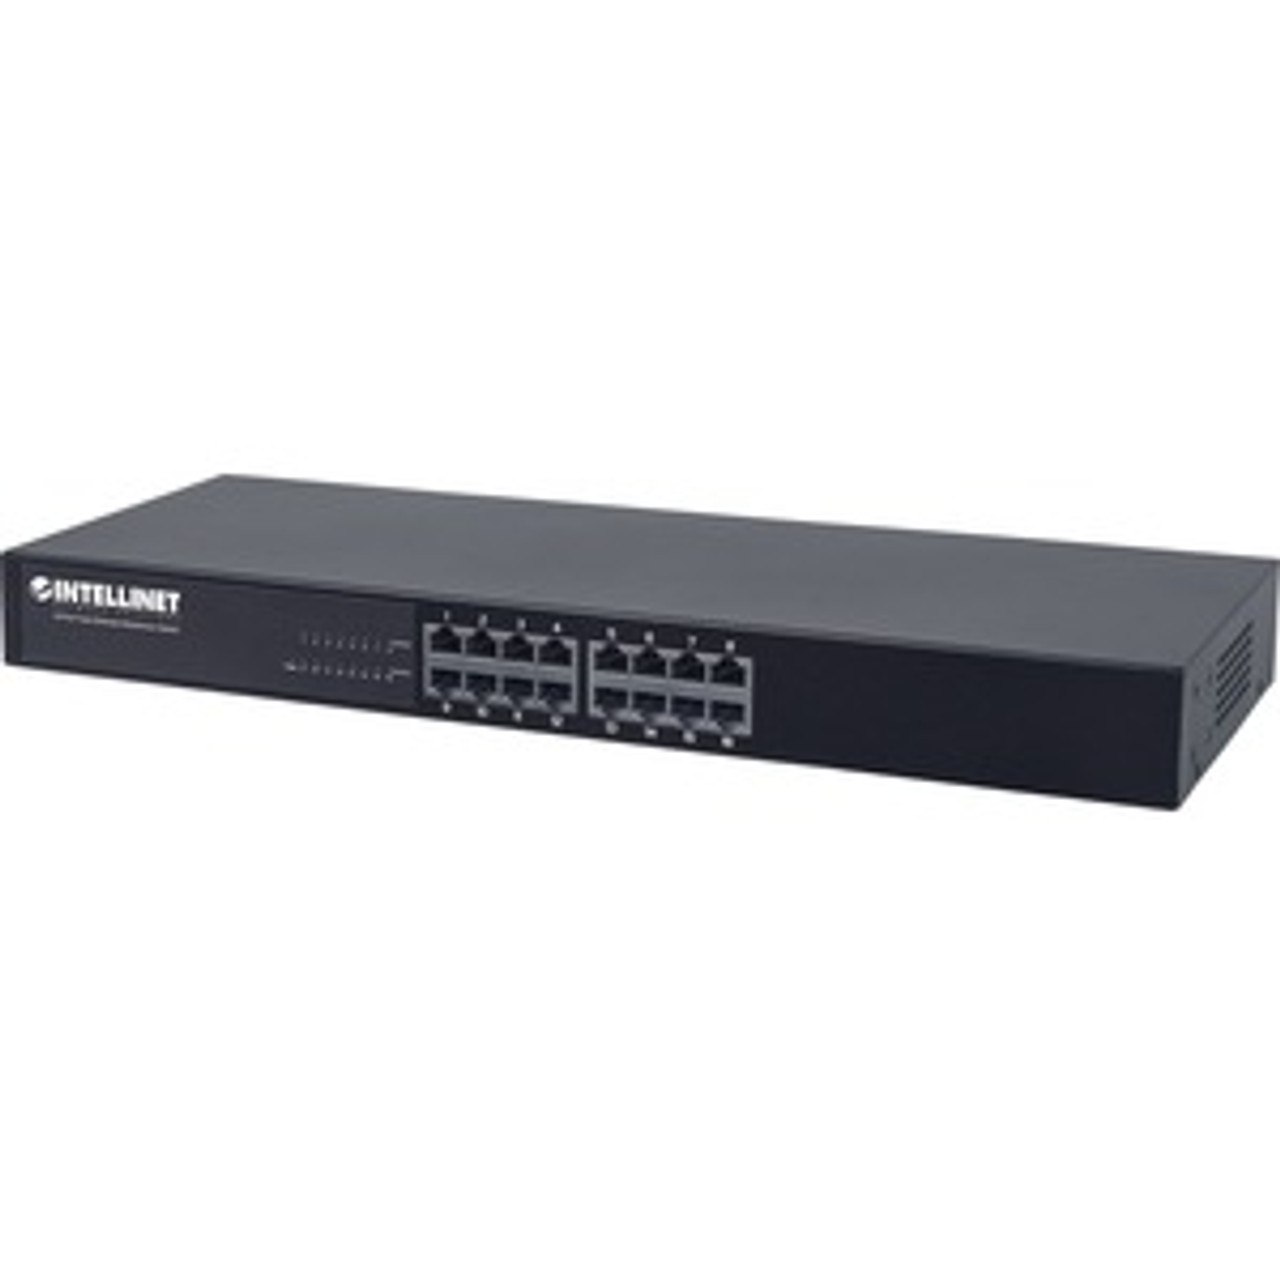 520409 NetGear Intellinet 16-Port 10/100 Rackmount Switch Metal Housing 10/100 Auto-Sensing Ports Automatically Detect Optimal Network Speeds with